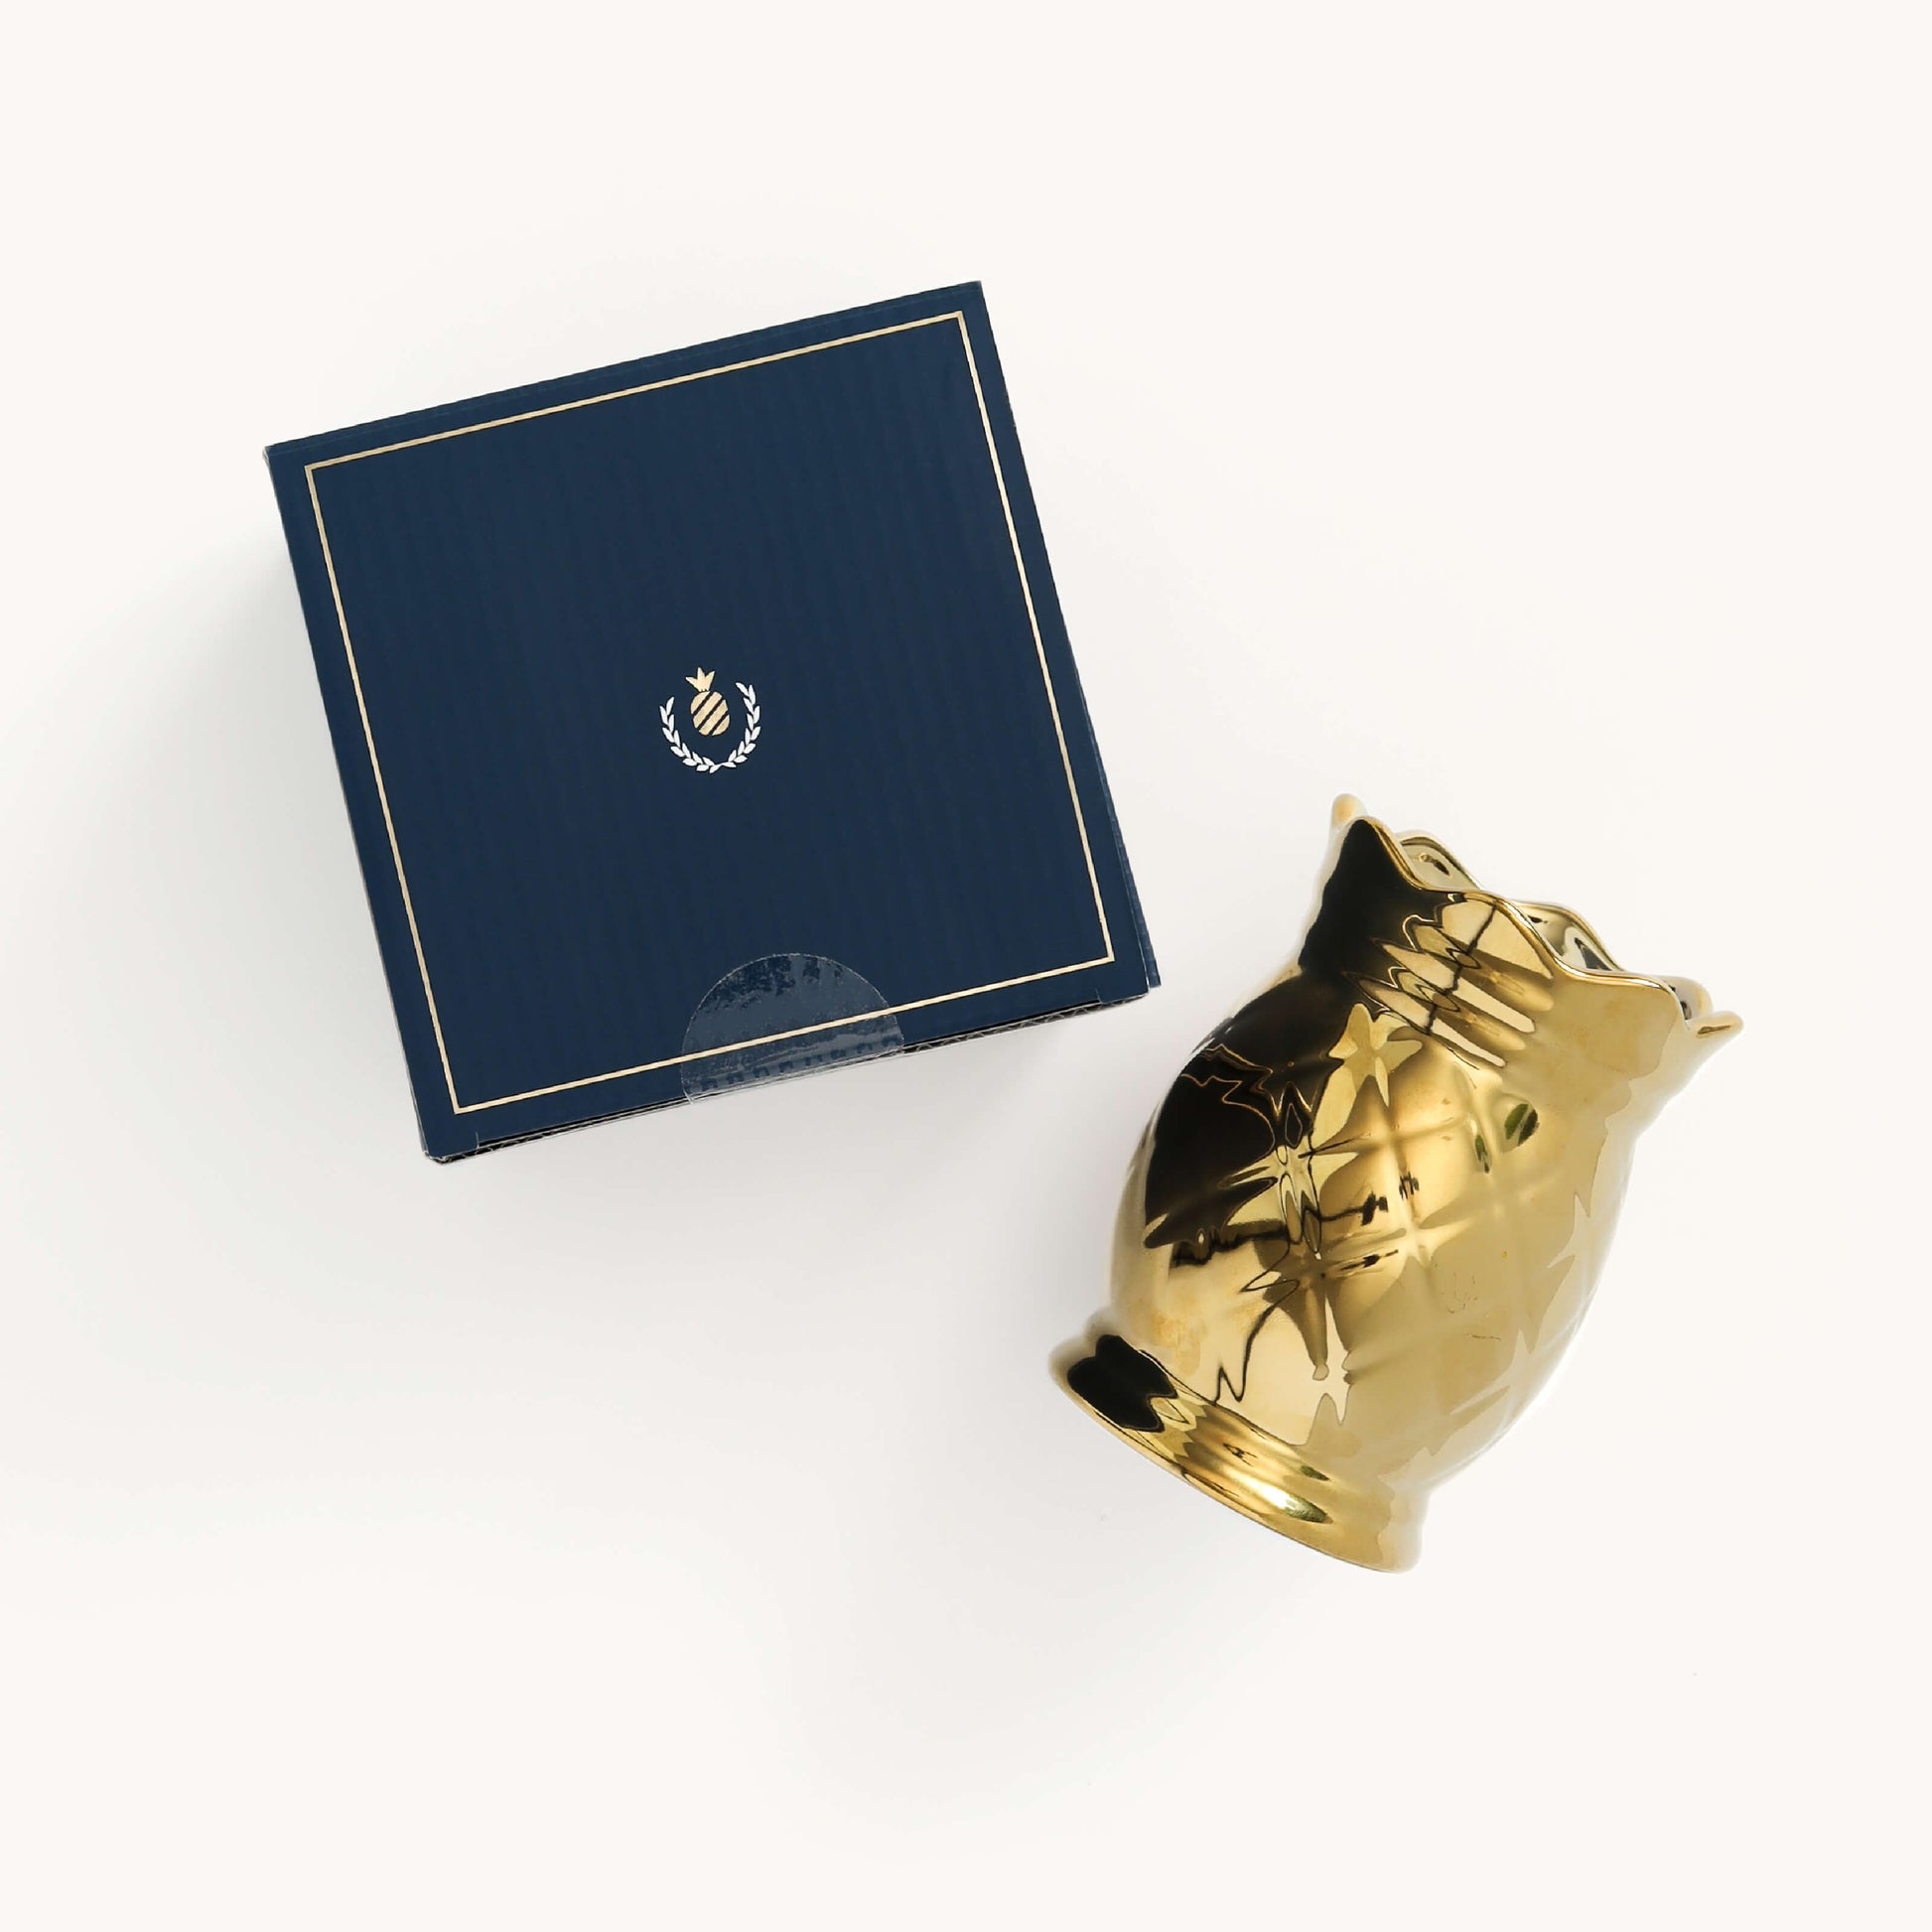 Gold Pineapple Pen Cup & Box